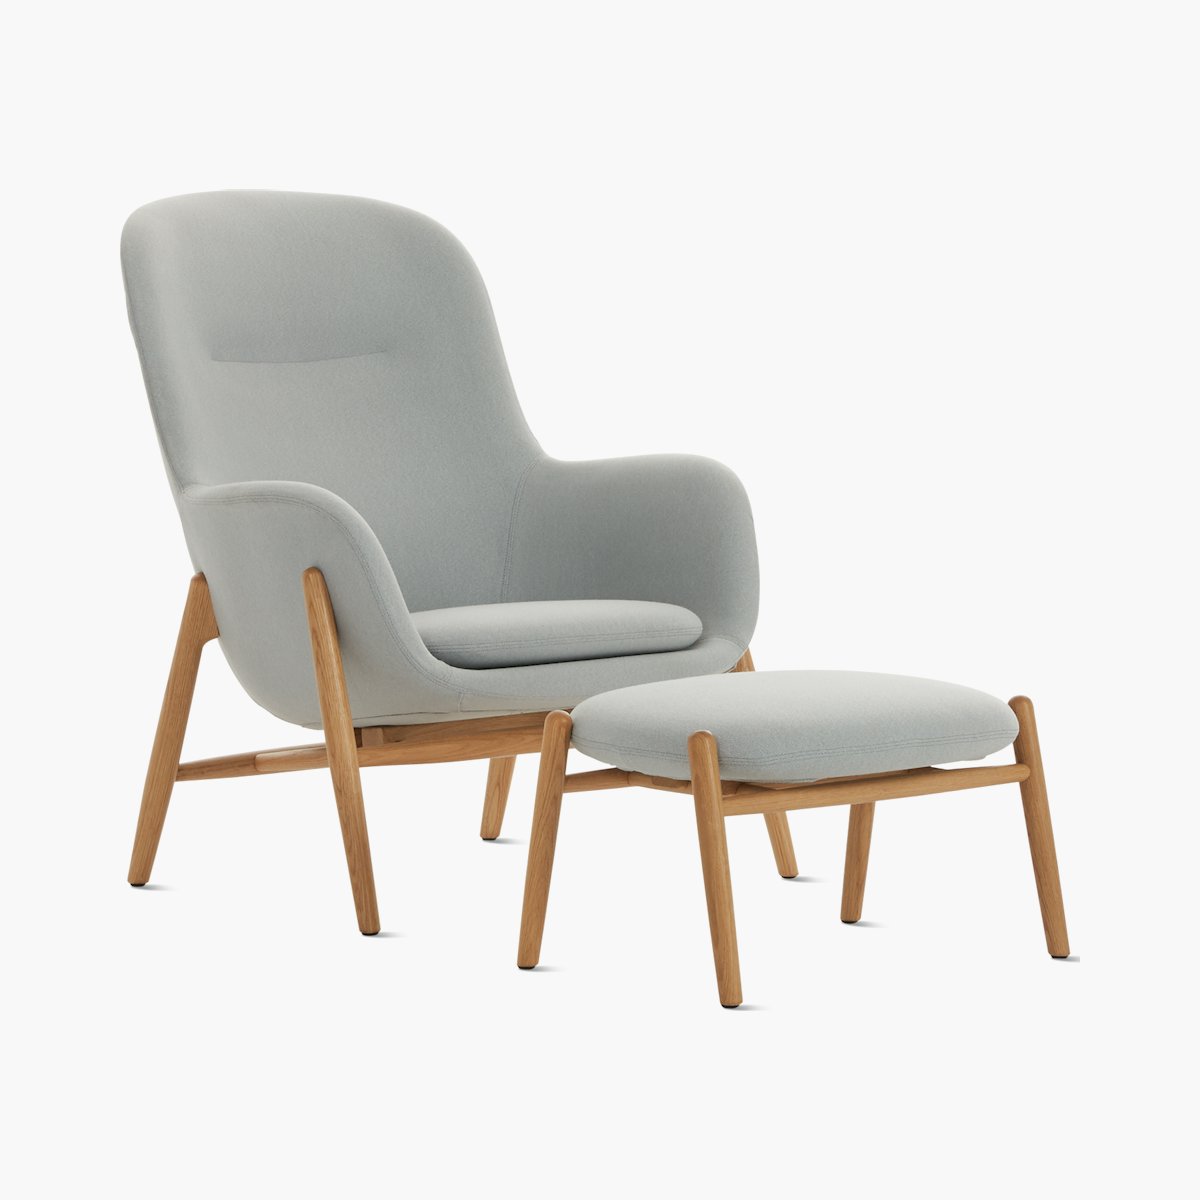 Nora Lounge Chair and Ottoman